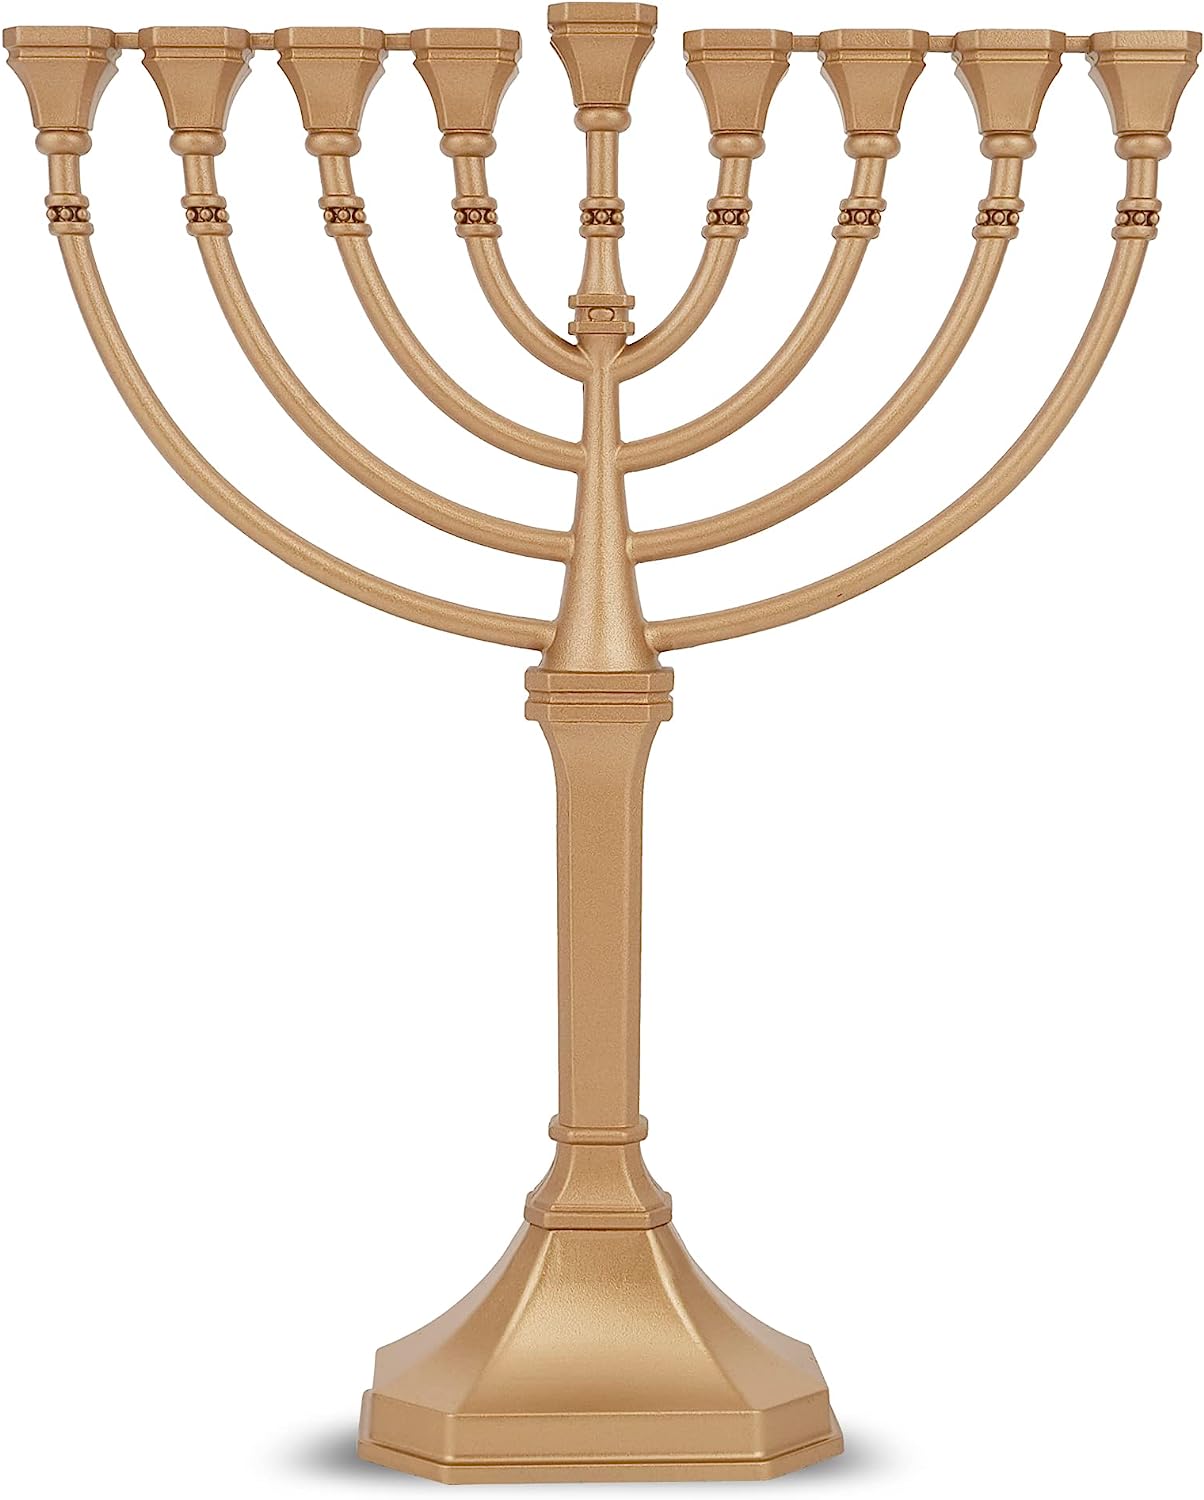 Traditional Graceful Style Menorah 9.5" Tall Non Tarnish - Precision Die Cast Classic Chanukah Candle Menora (Satin Gold) By Zion Judaica - image 1 of 6